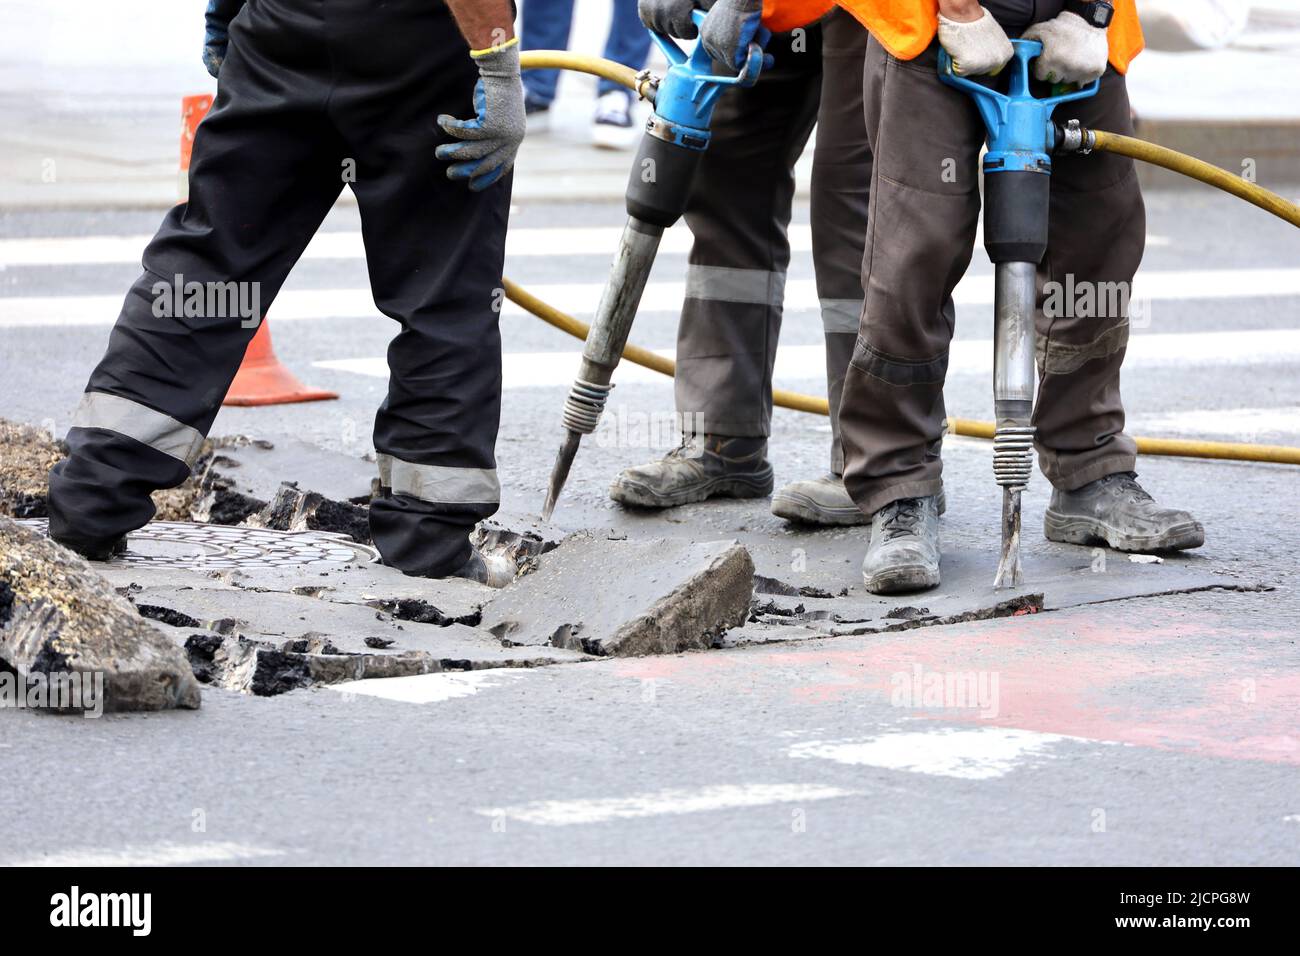 Workers repair the road surface with a jackhammer. Construction work, sewer repairing in city Stock Photo